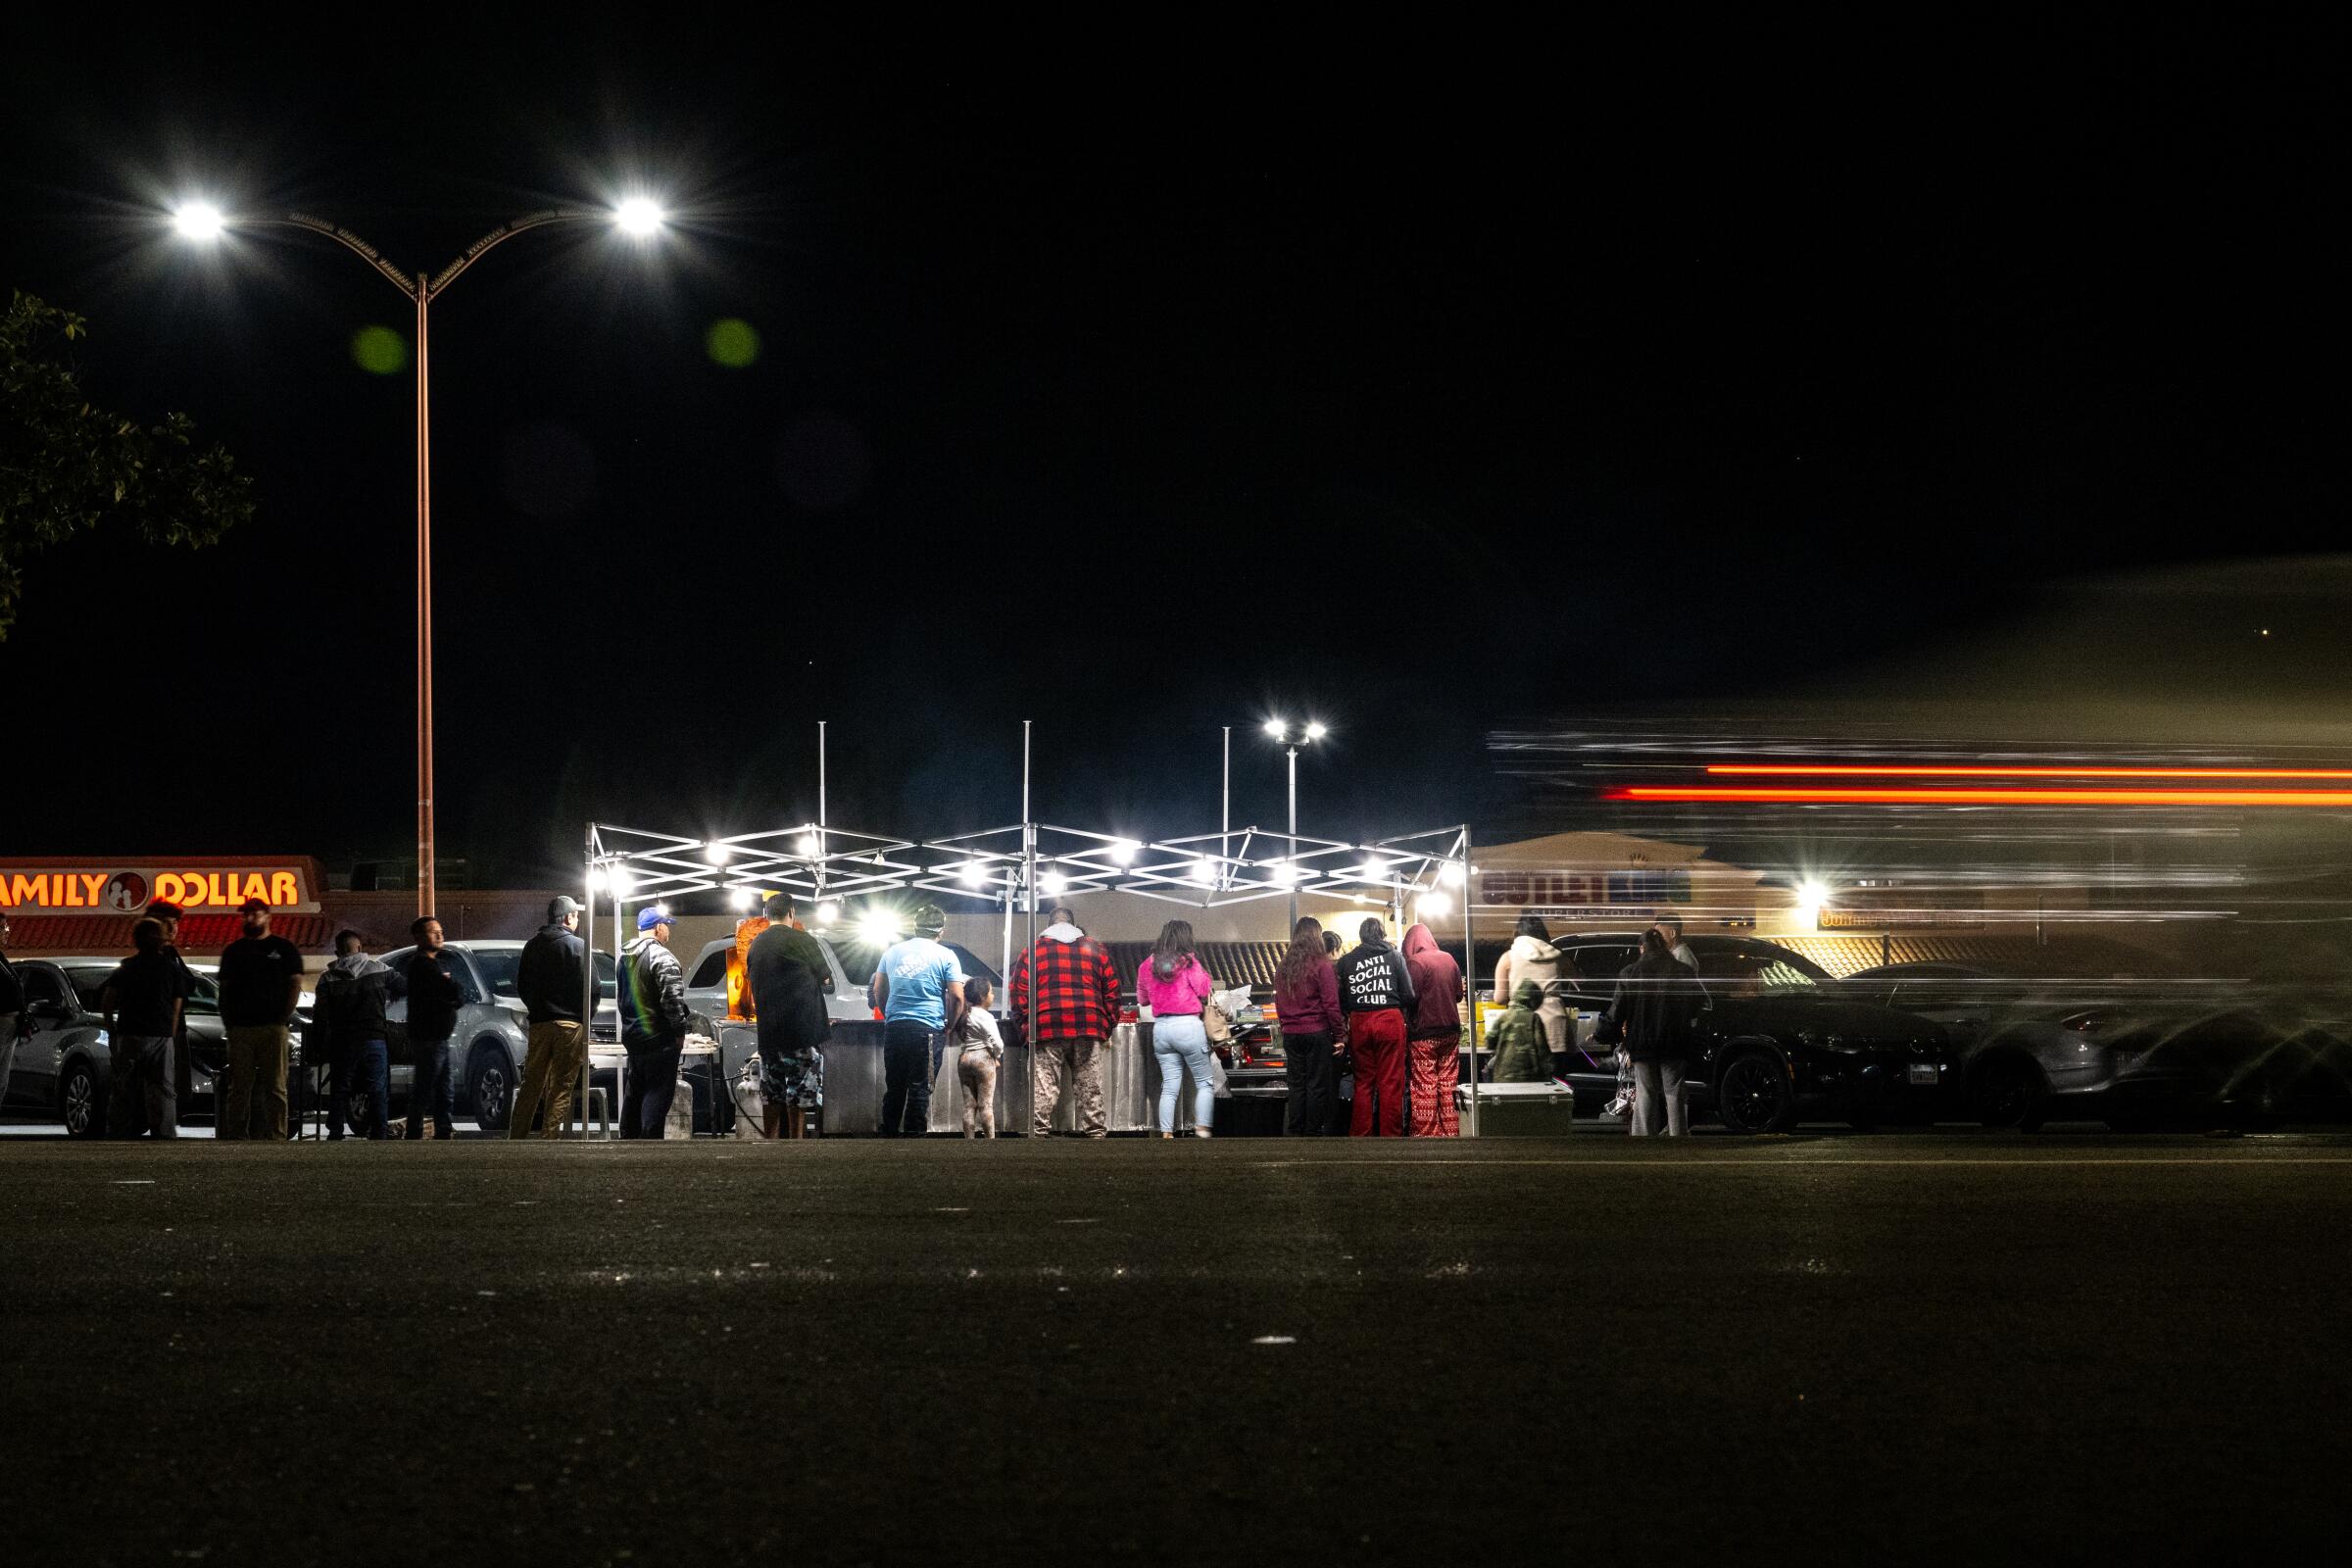 A crowd forms at a taco stand at night.